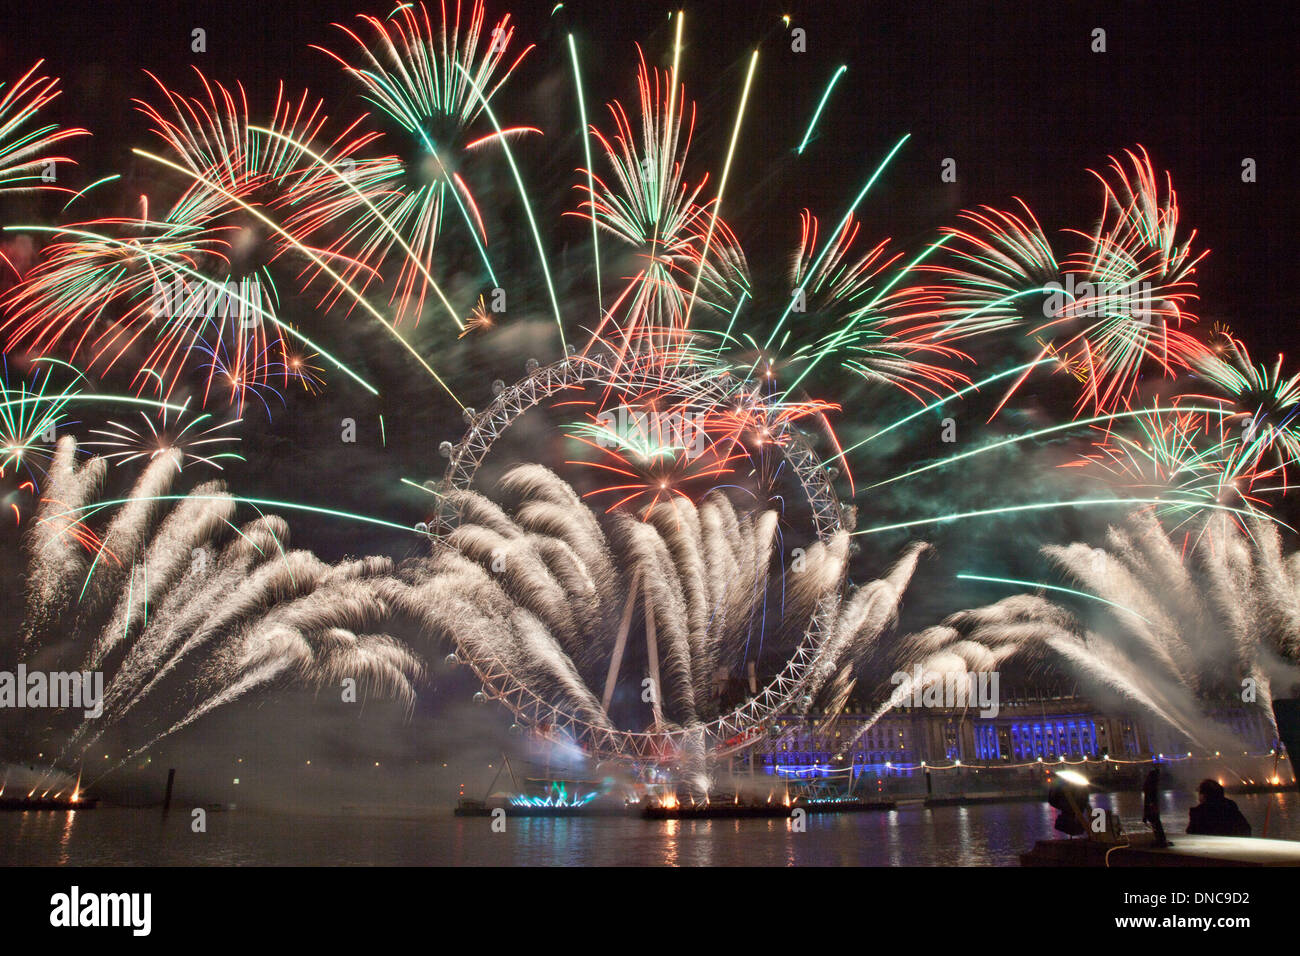 Firework images from 2012/2013. This years celebrations will include a 'multi-sensory' firework display. there will be a host of special effects involving sight, sound, fruit flavours and fruit smells. Stock Photo